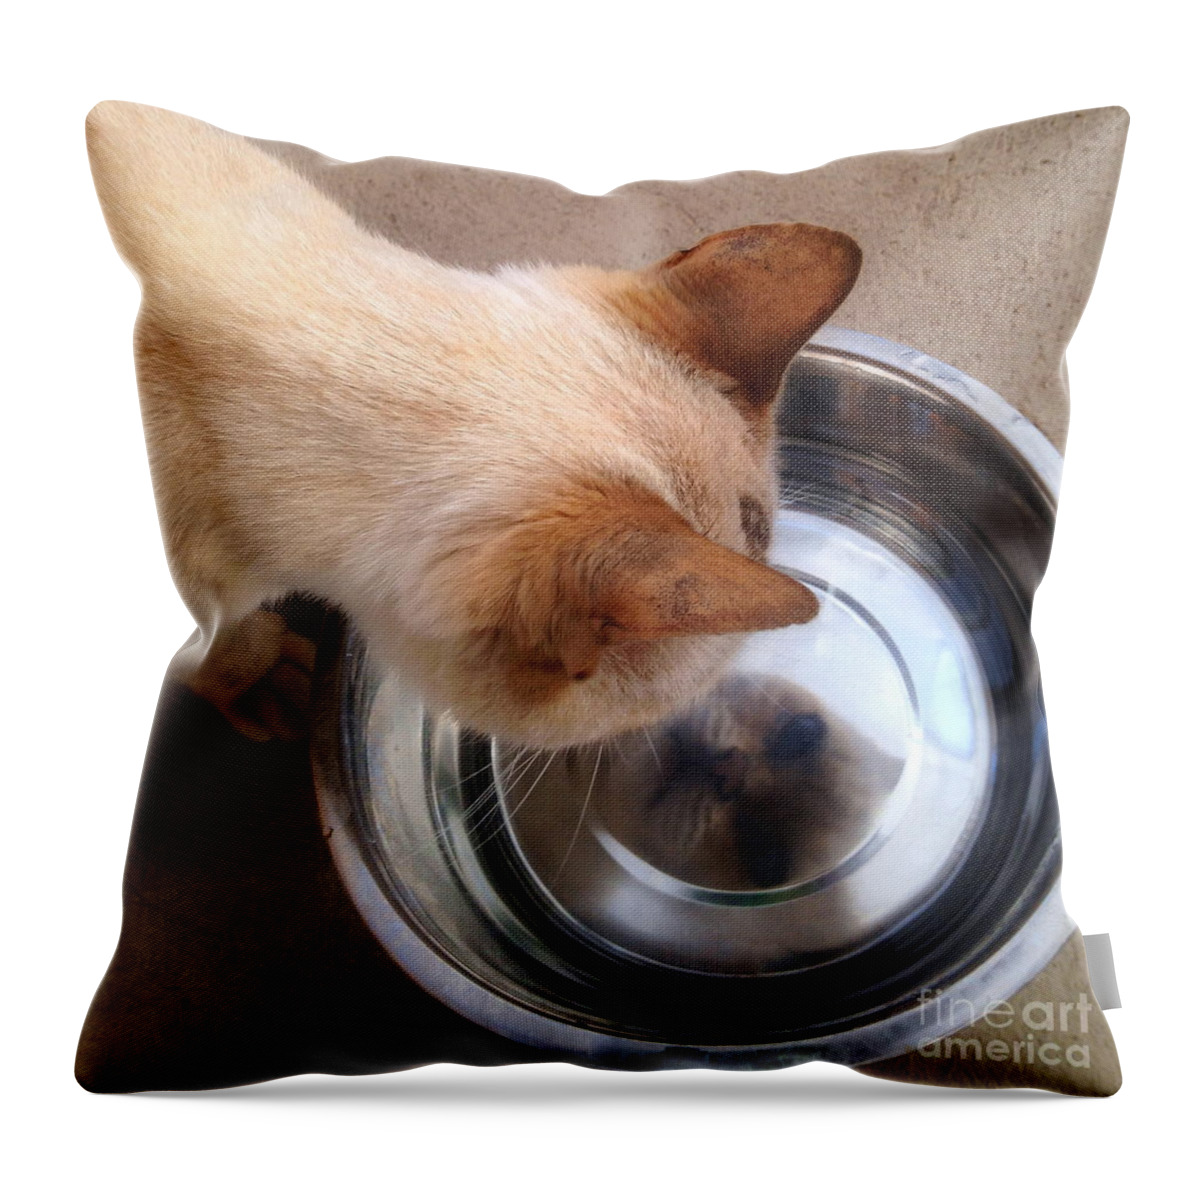  Throw Pillow featuring the photograph Naala1 by Angela Rath